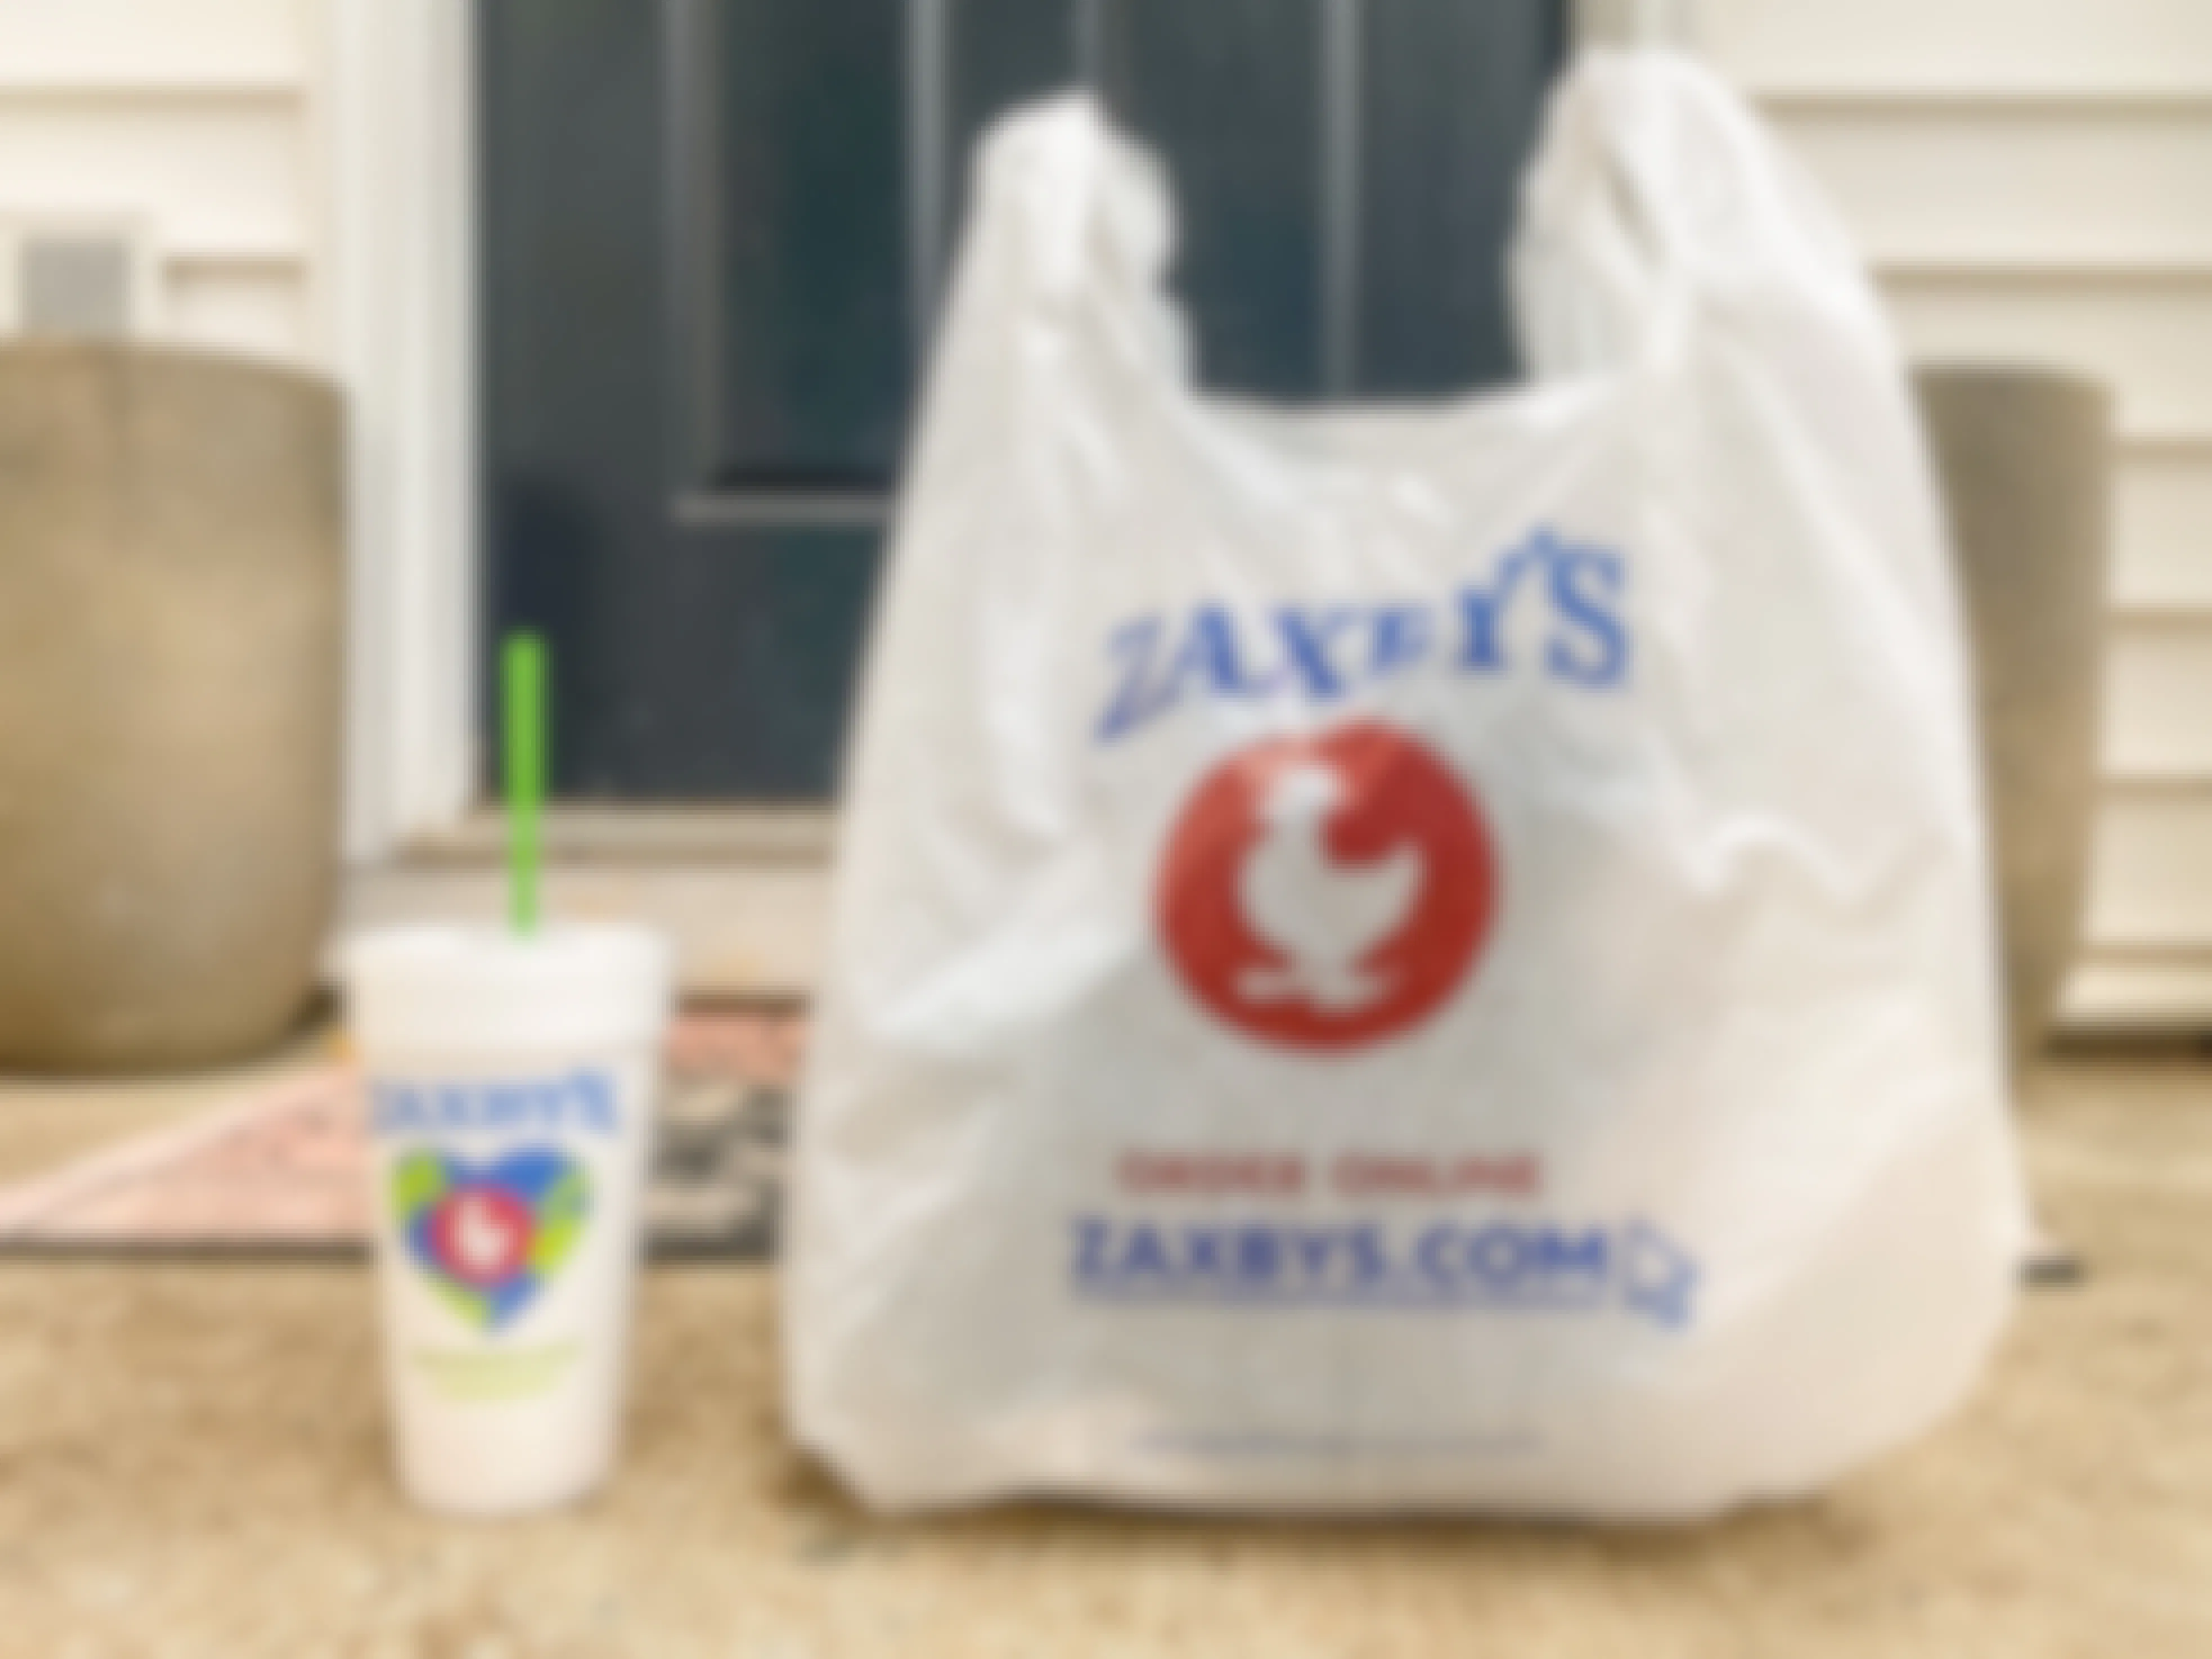 A Zaxby's takeout bag and drink sitting on a front porch.